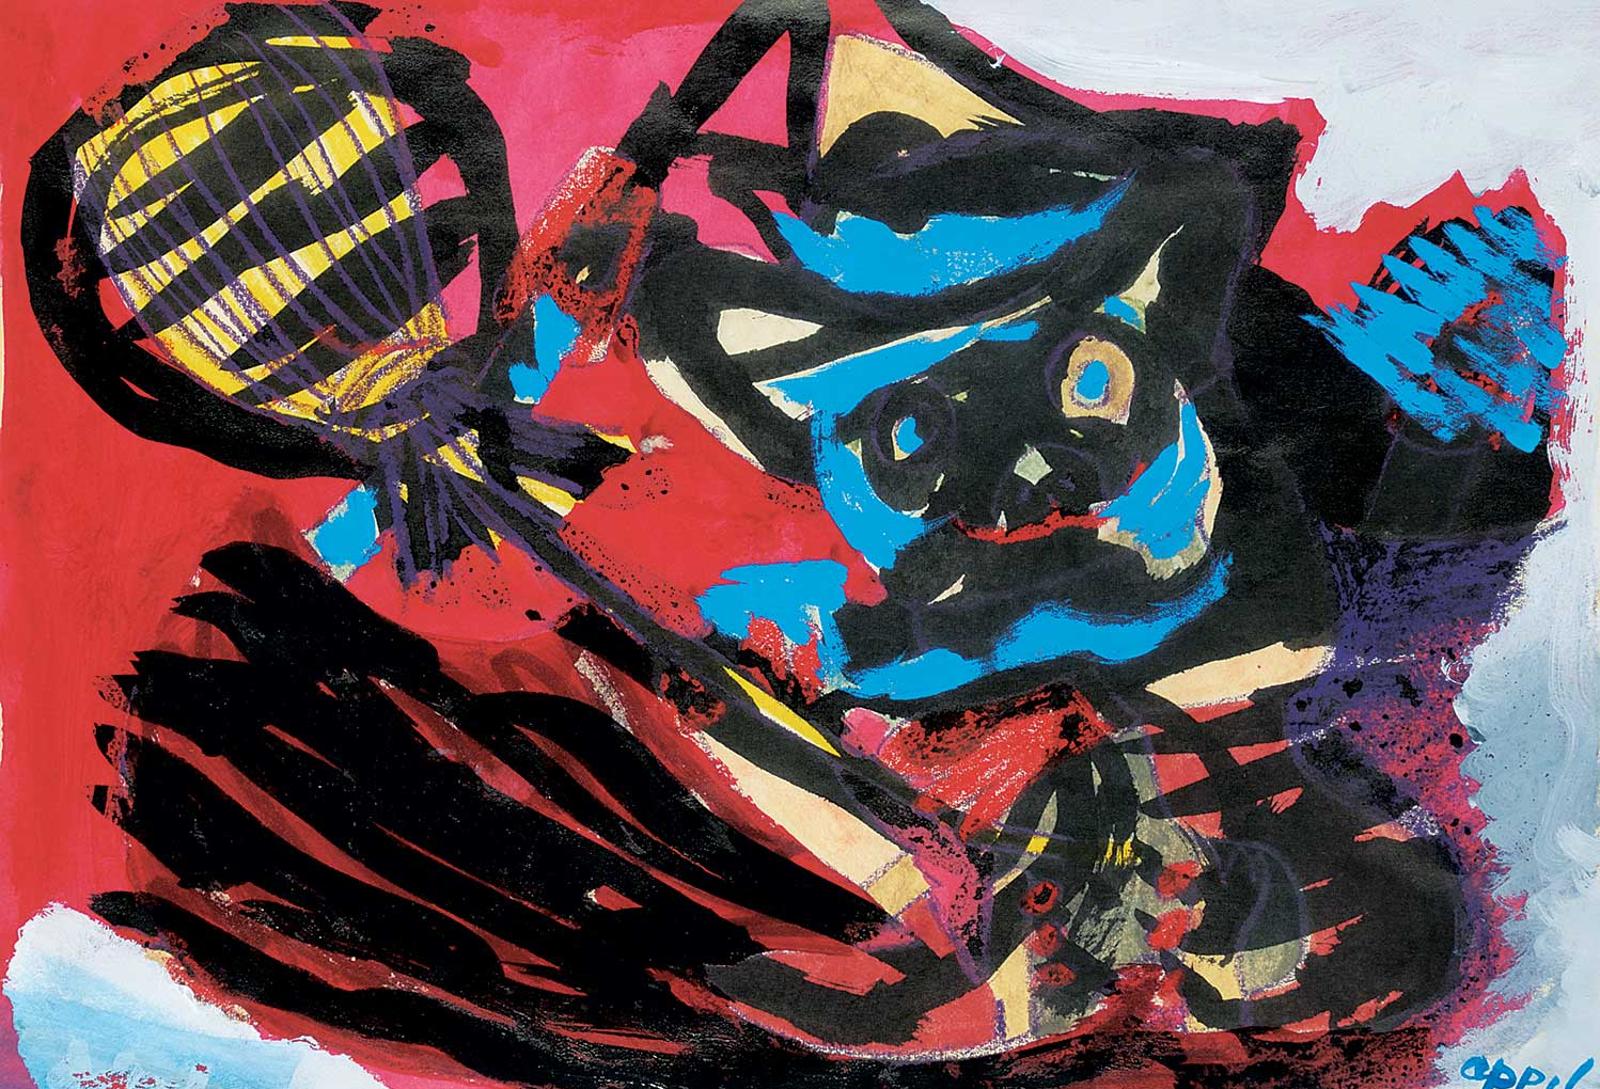 Karel Appel (1921-2006) - Cat with Toy